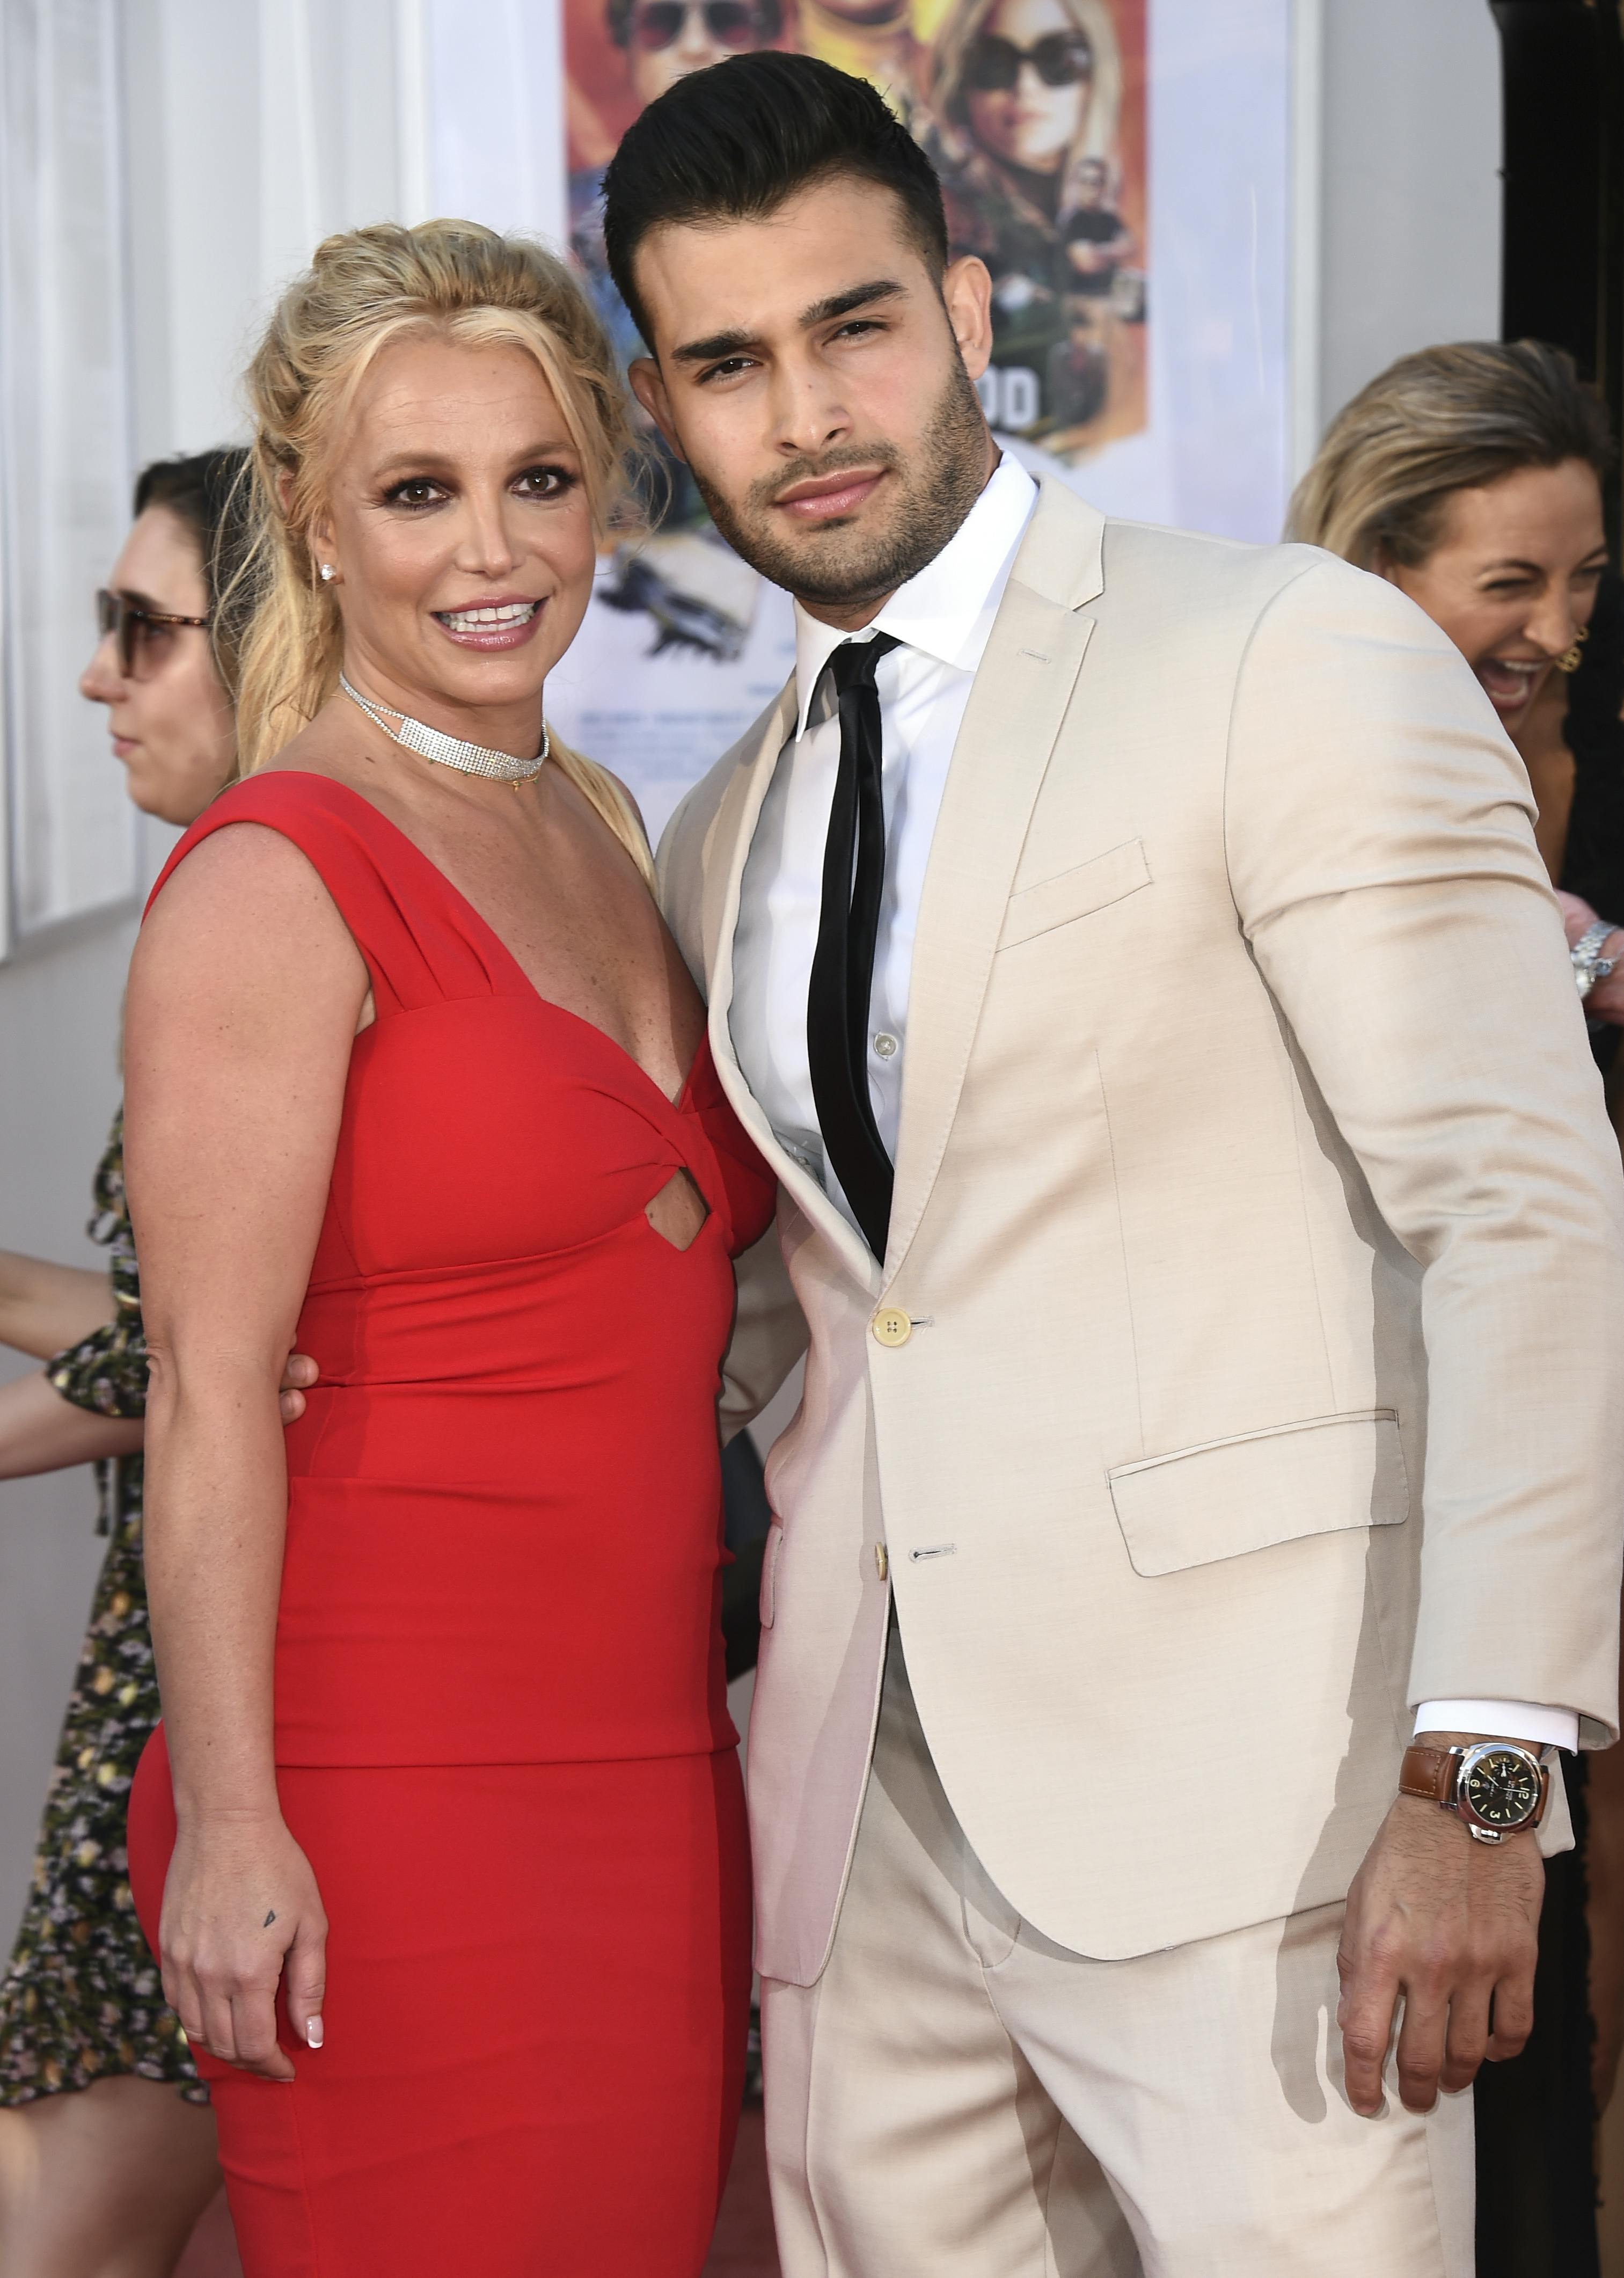 Britney Spears and Sam Asghari arrive at the Los Angeles premiere of "Once Upon a Time in Hollywood" at the TCL Chinese Theatre on July 22, 2019. Spears announced on Instagram on Sunday, Sept. 12, 2021, that she and Asghari are engaged. The couple met on the set of her 'Slumber Party' music video in 2016. (Photo by Jordan Strauss/Invision/AP, File)